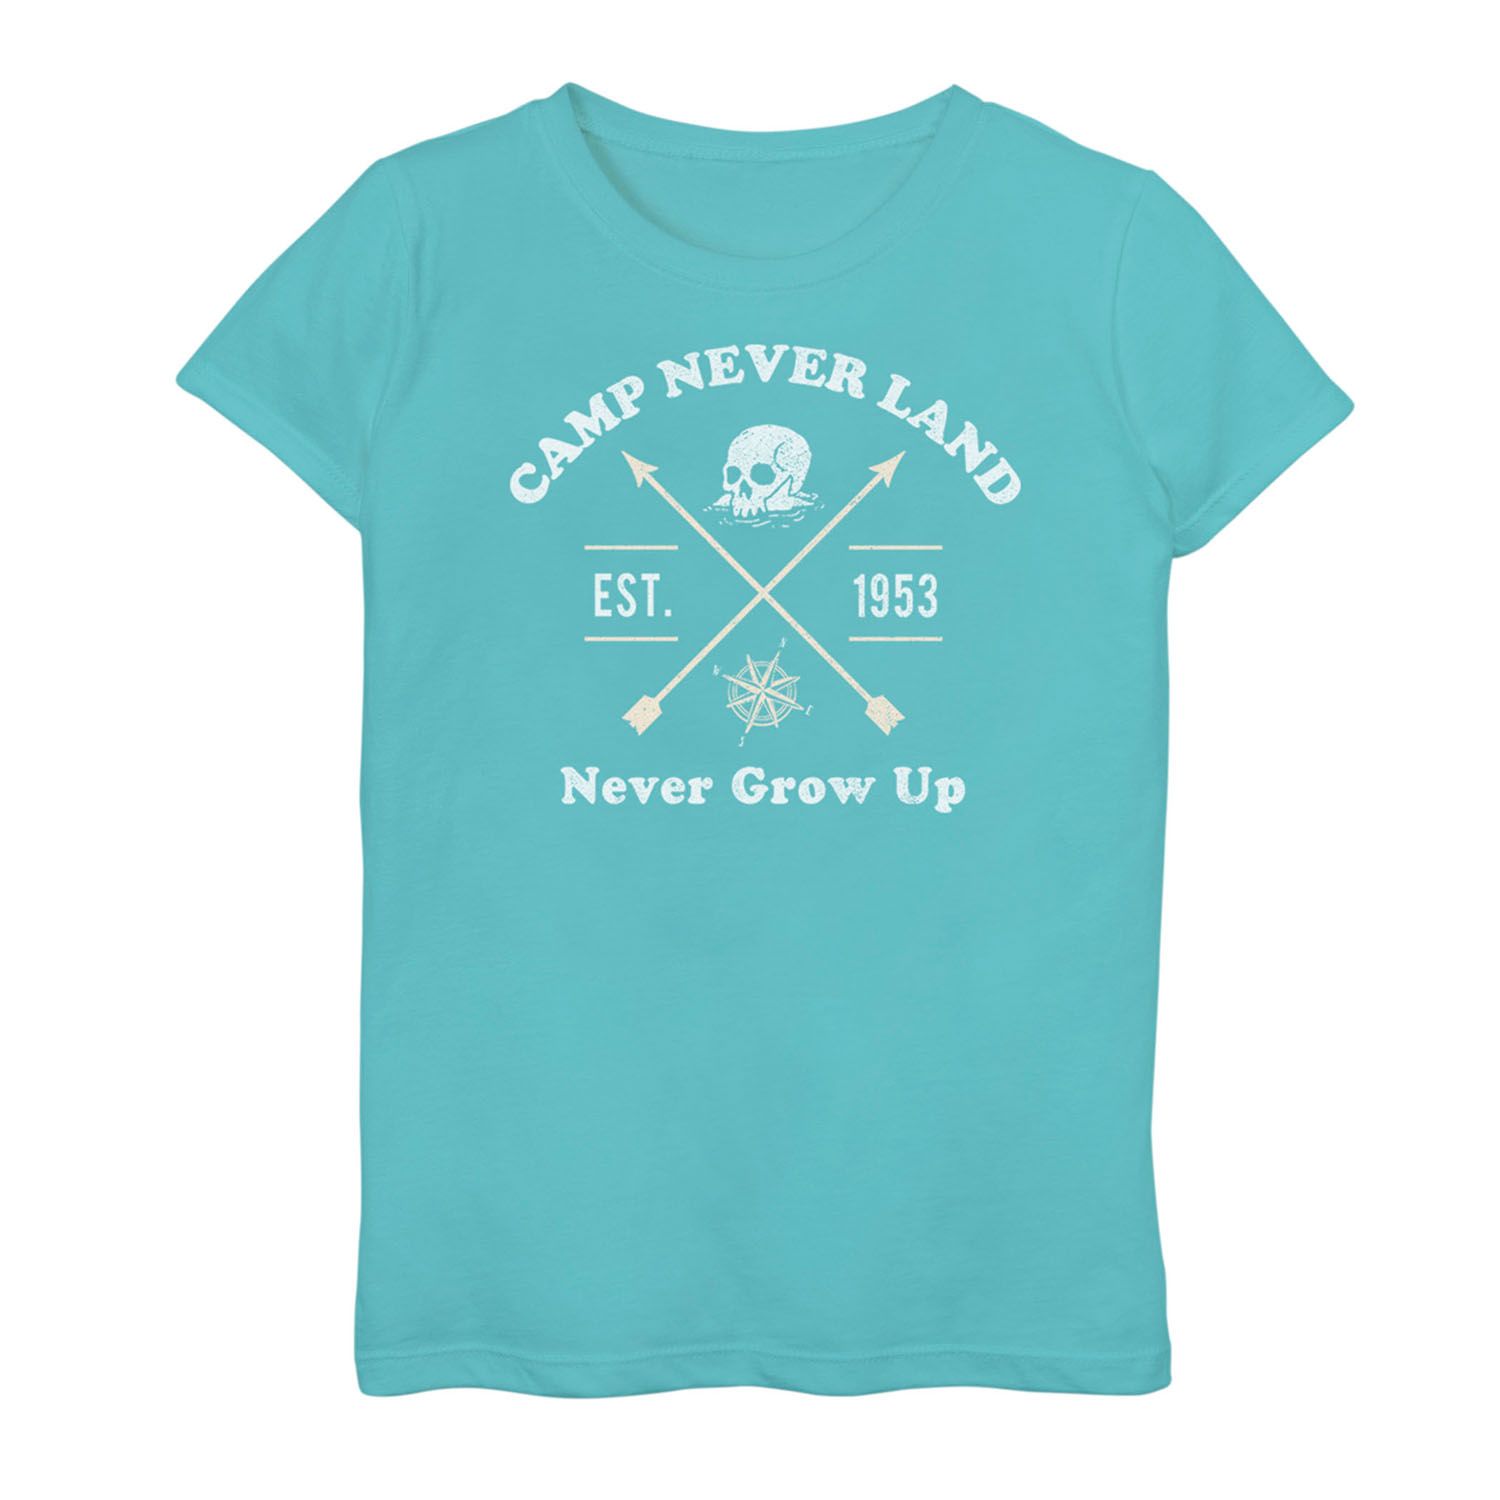 Image for Disney 's Peter Pan Girls 7-16 "Camp Never Land" Graphic Tee at Kohl's.